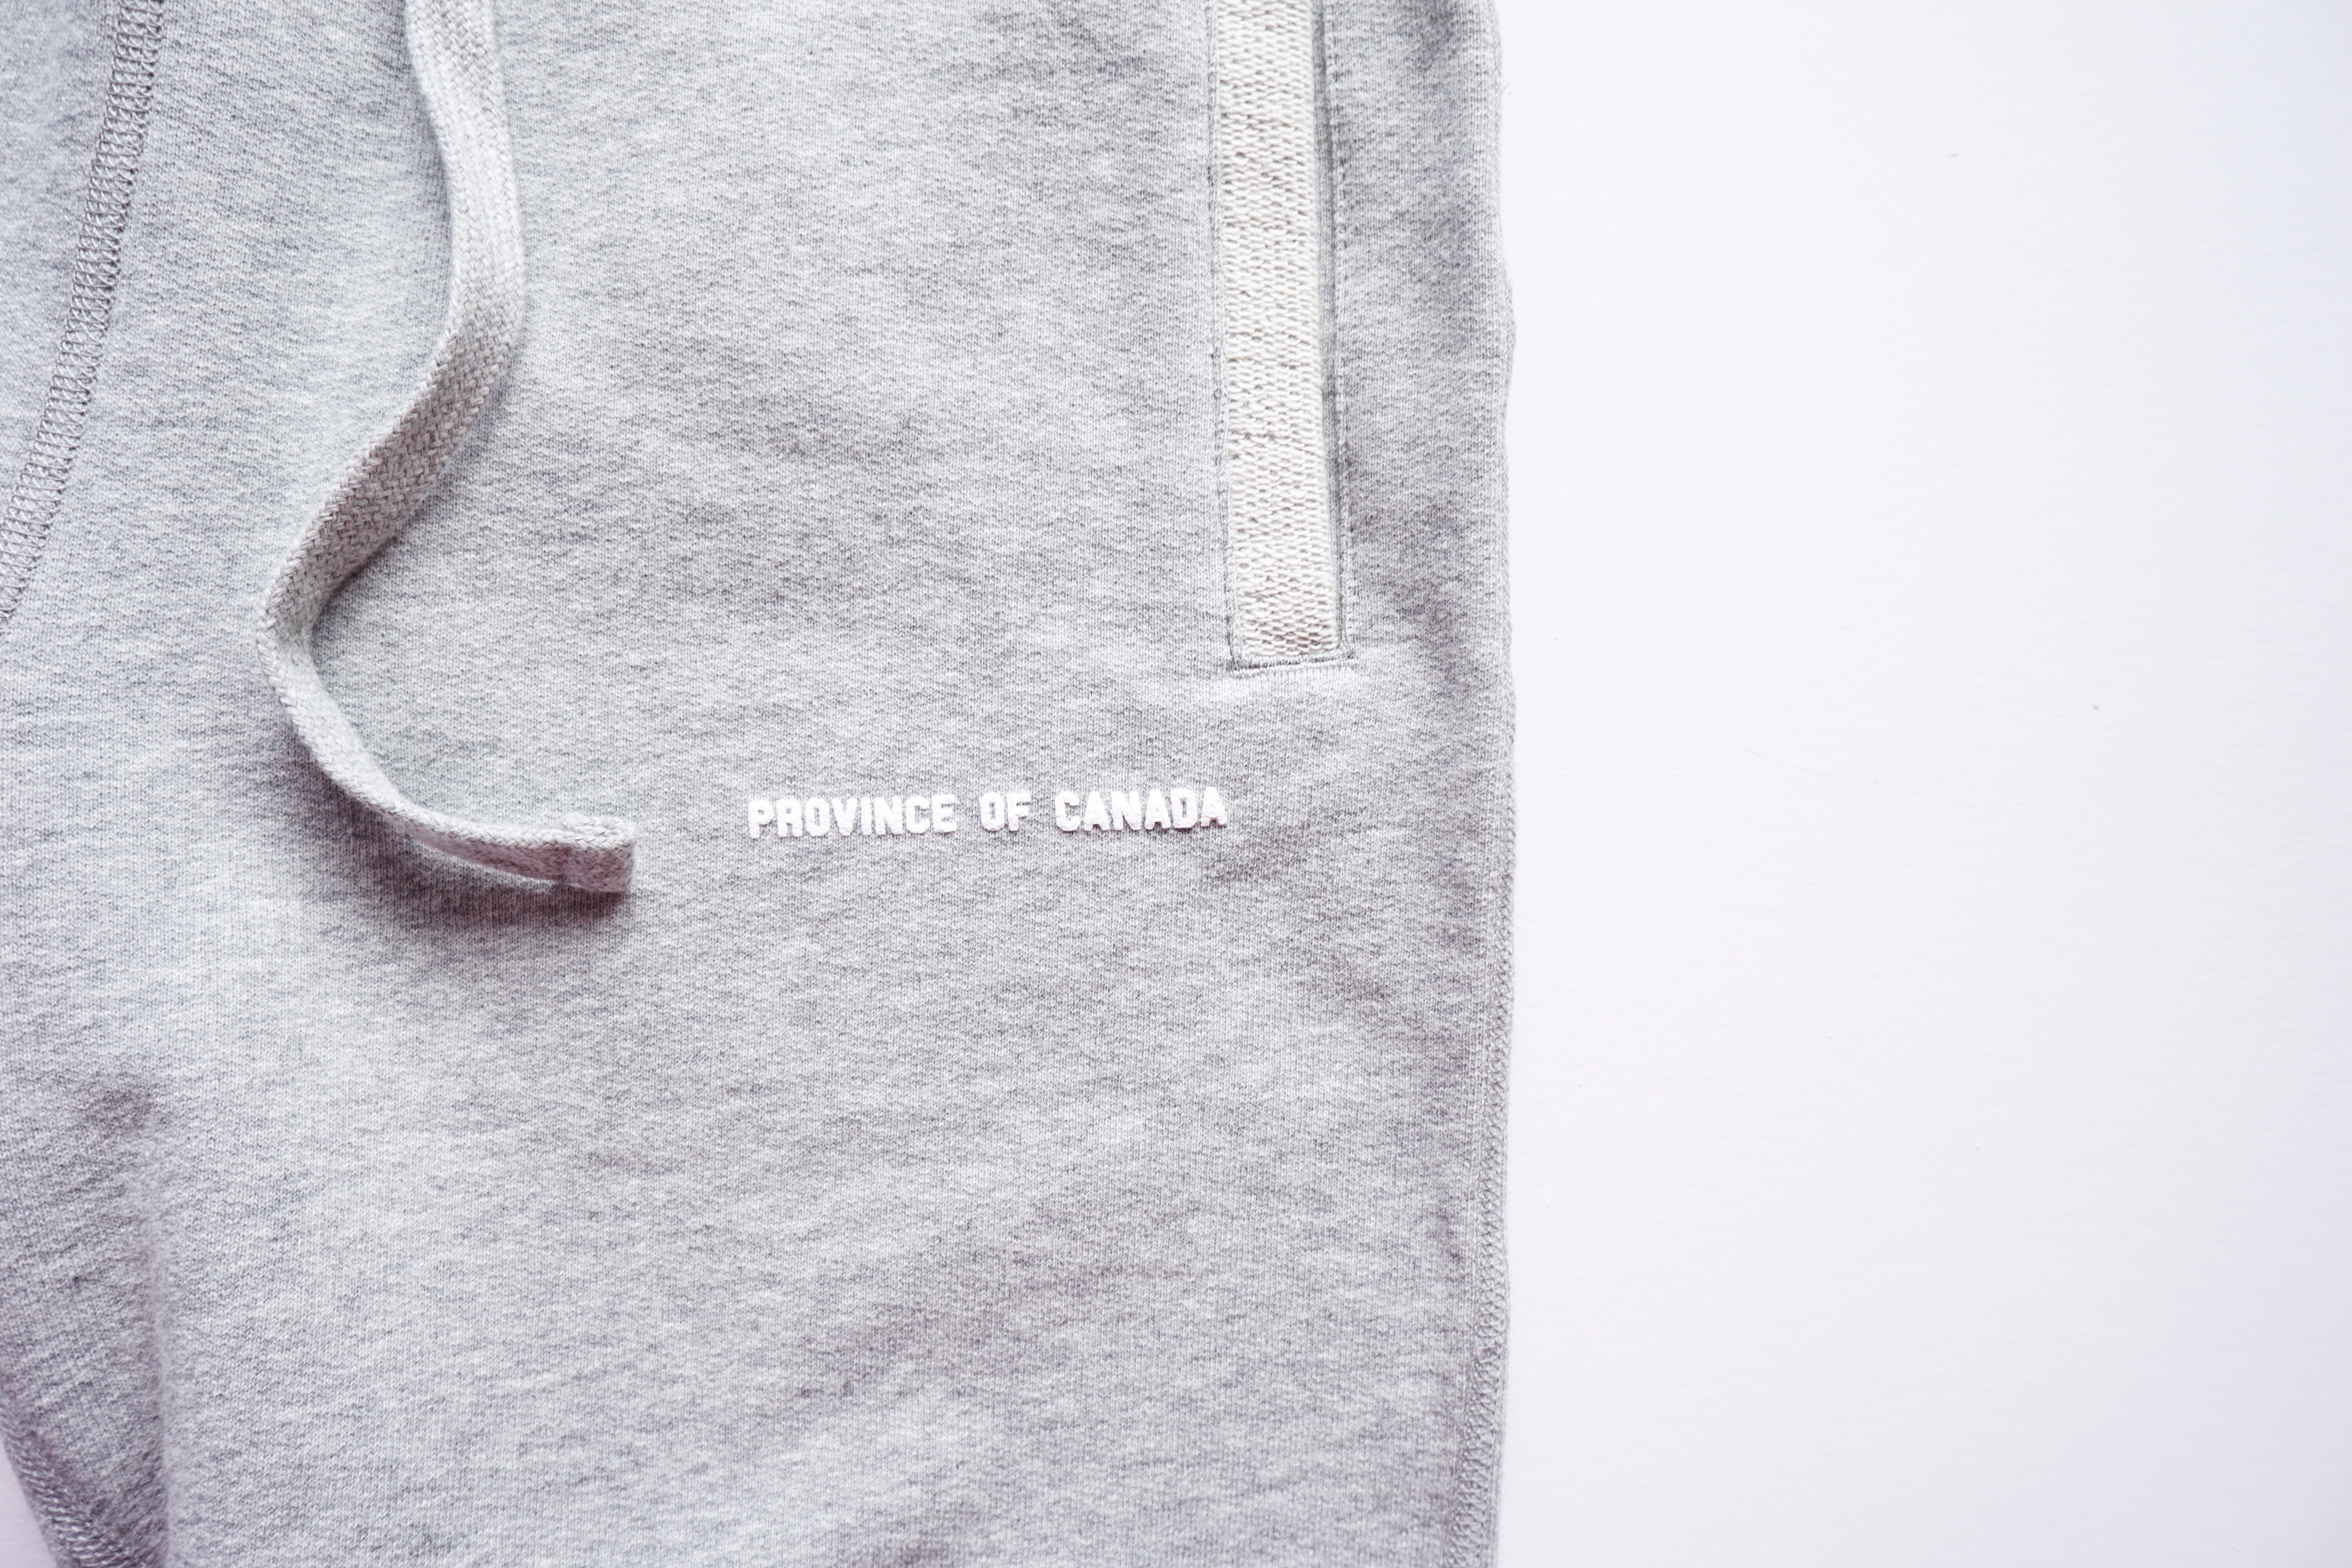 Drea Marie shares a clothing line that she is swooning over; Province of Canada. This Canadian made brand is well made and trendy. PERFECT.